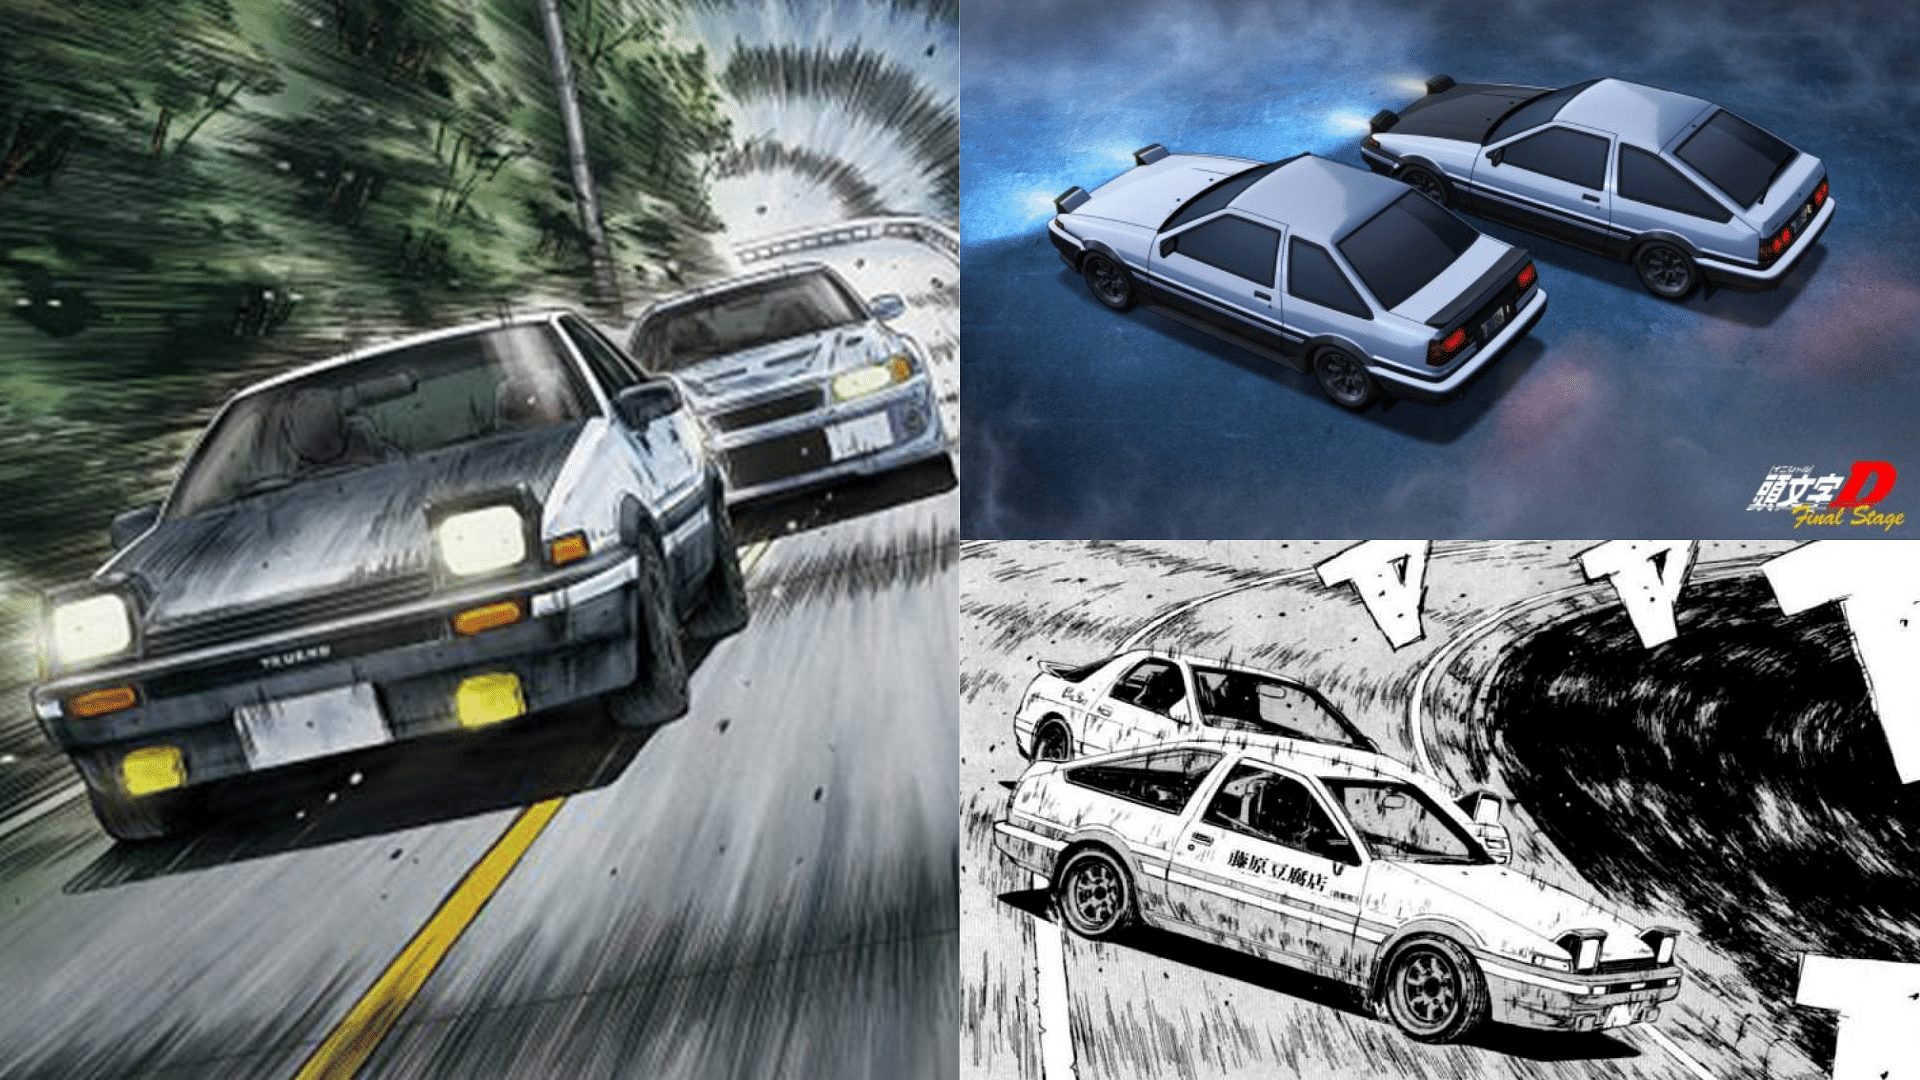 Also, Initial D made the car a pop culture icon